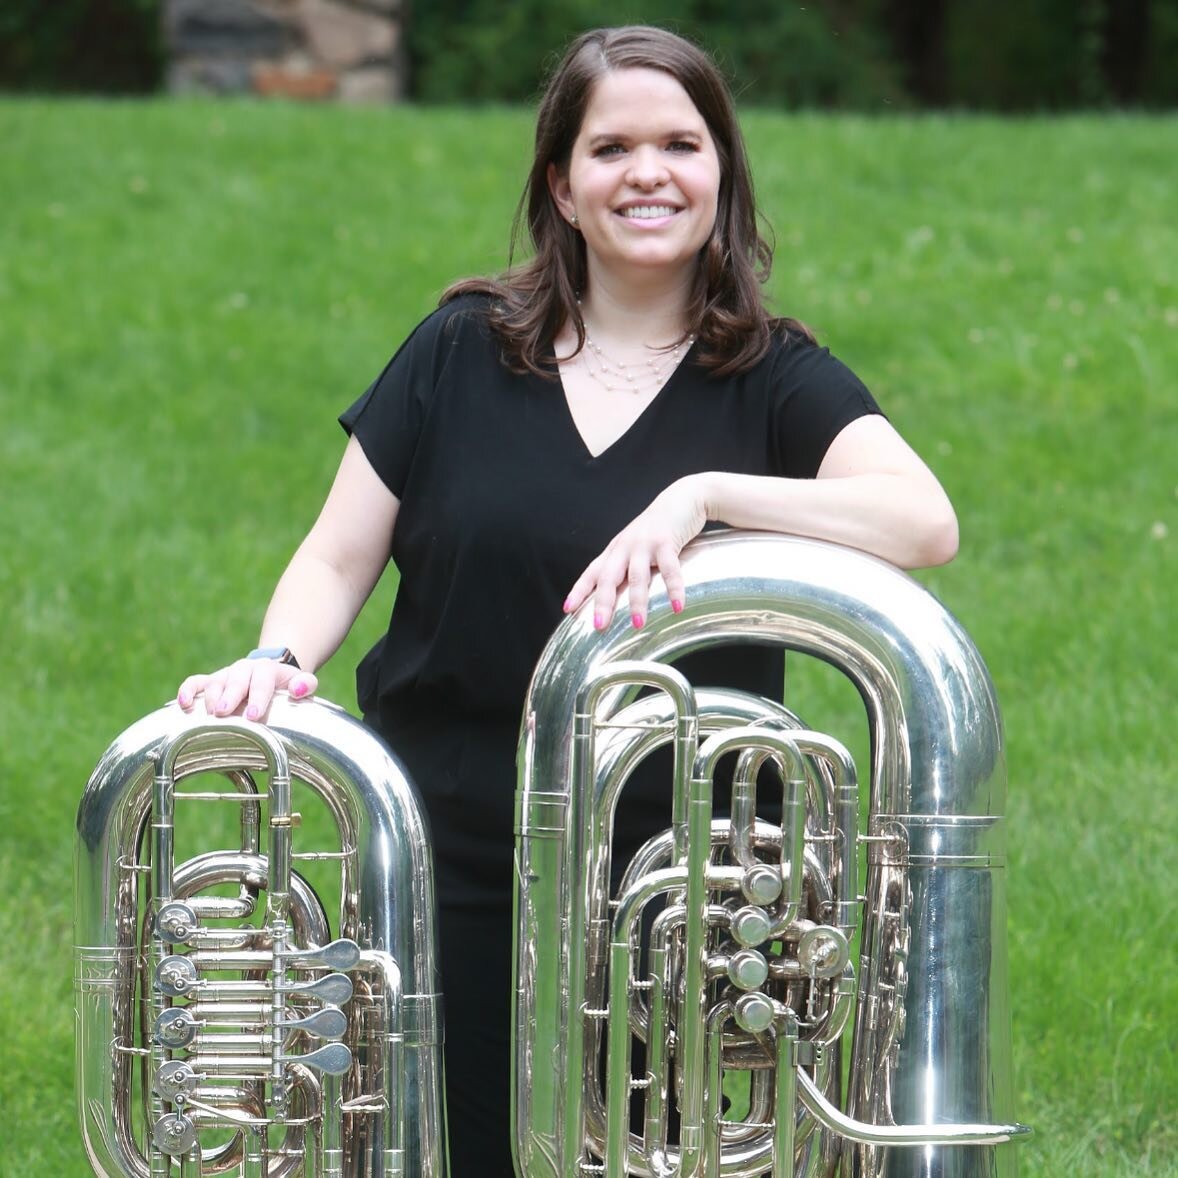 Meet the members! @iliketotubatuba 
🎶
Genevieve Blesch is a low brass performer and educator in the tri-state area, specializing in the tuba. She  received her bachelor&rsquo;s degree in music education and master&rsquo;s degree in tuba performance 